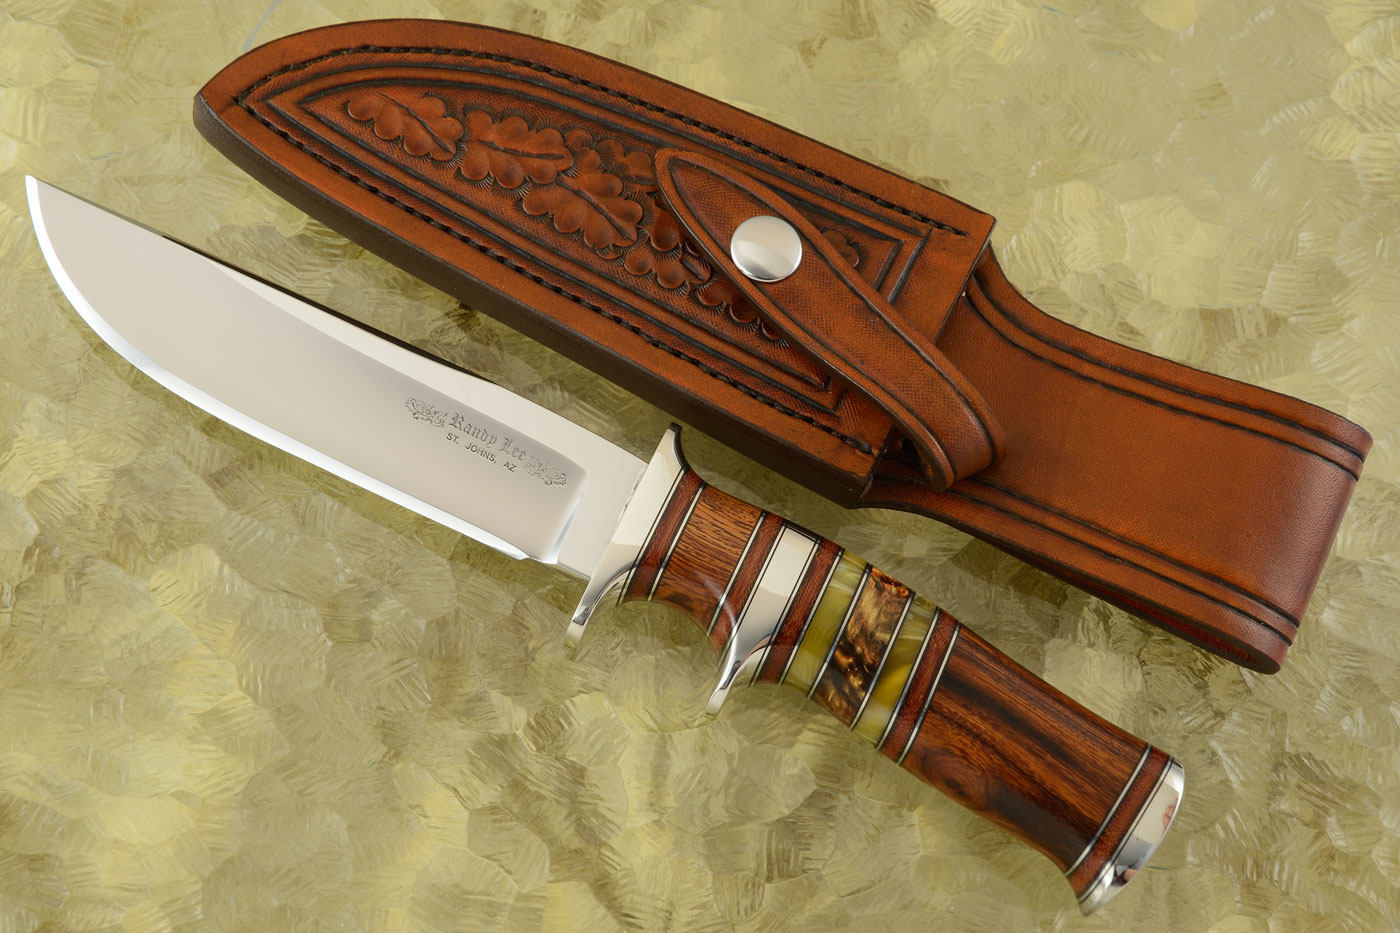 Subhilt Fighter with Ironwood